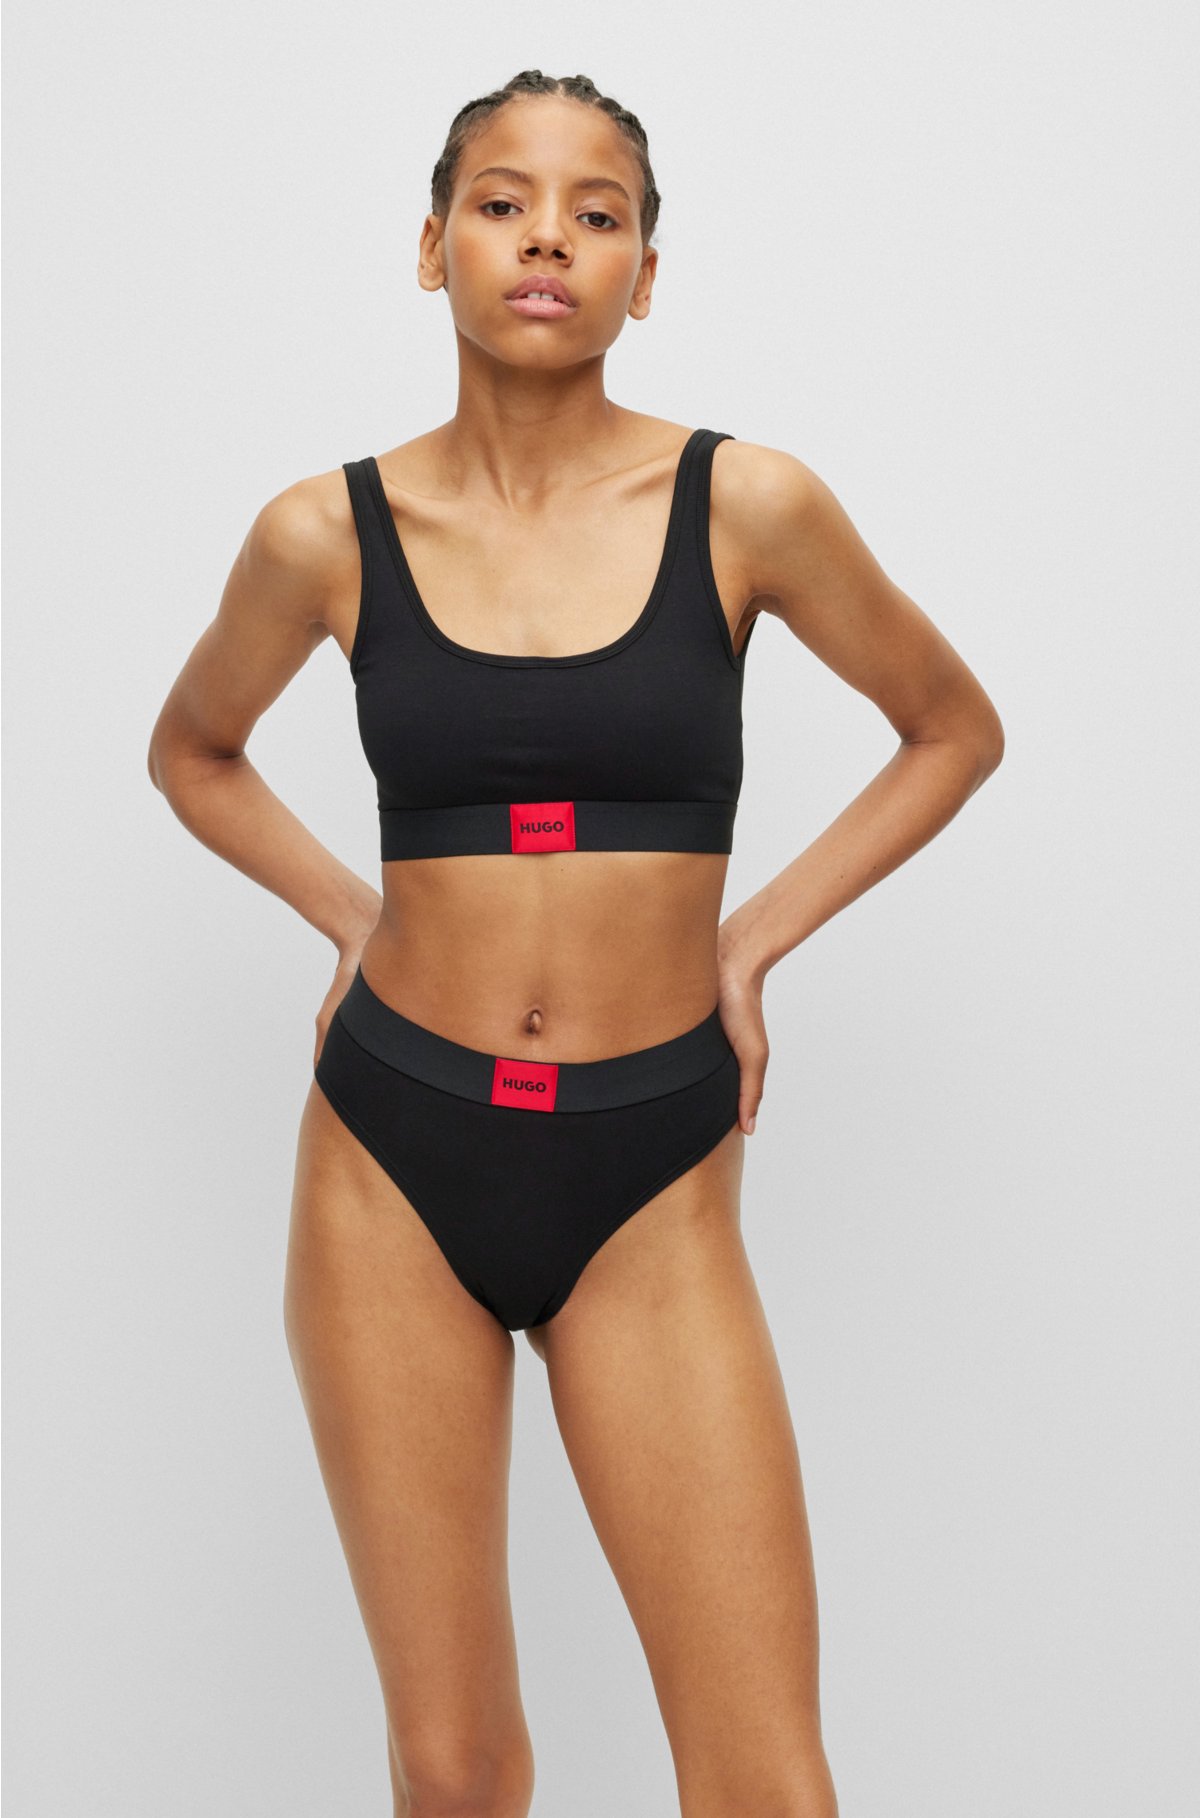 HUGO - Stretch-cotton bralette with red logo label